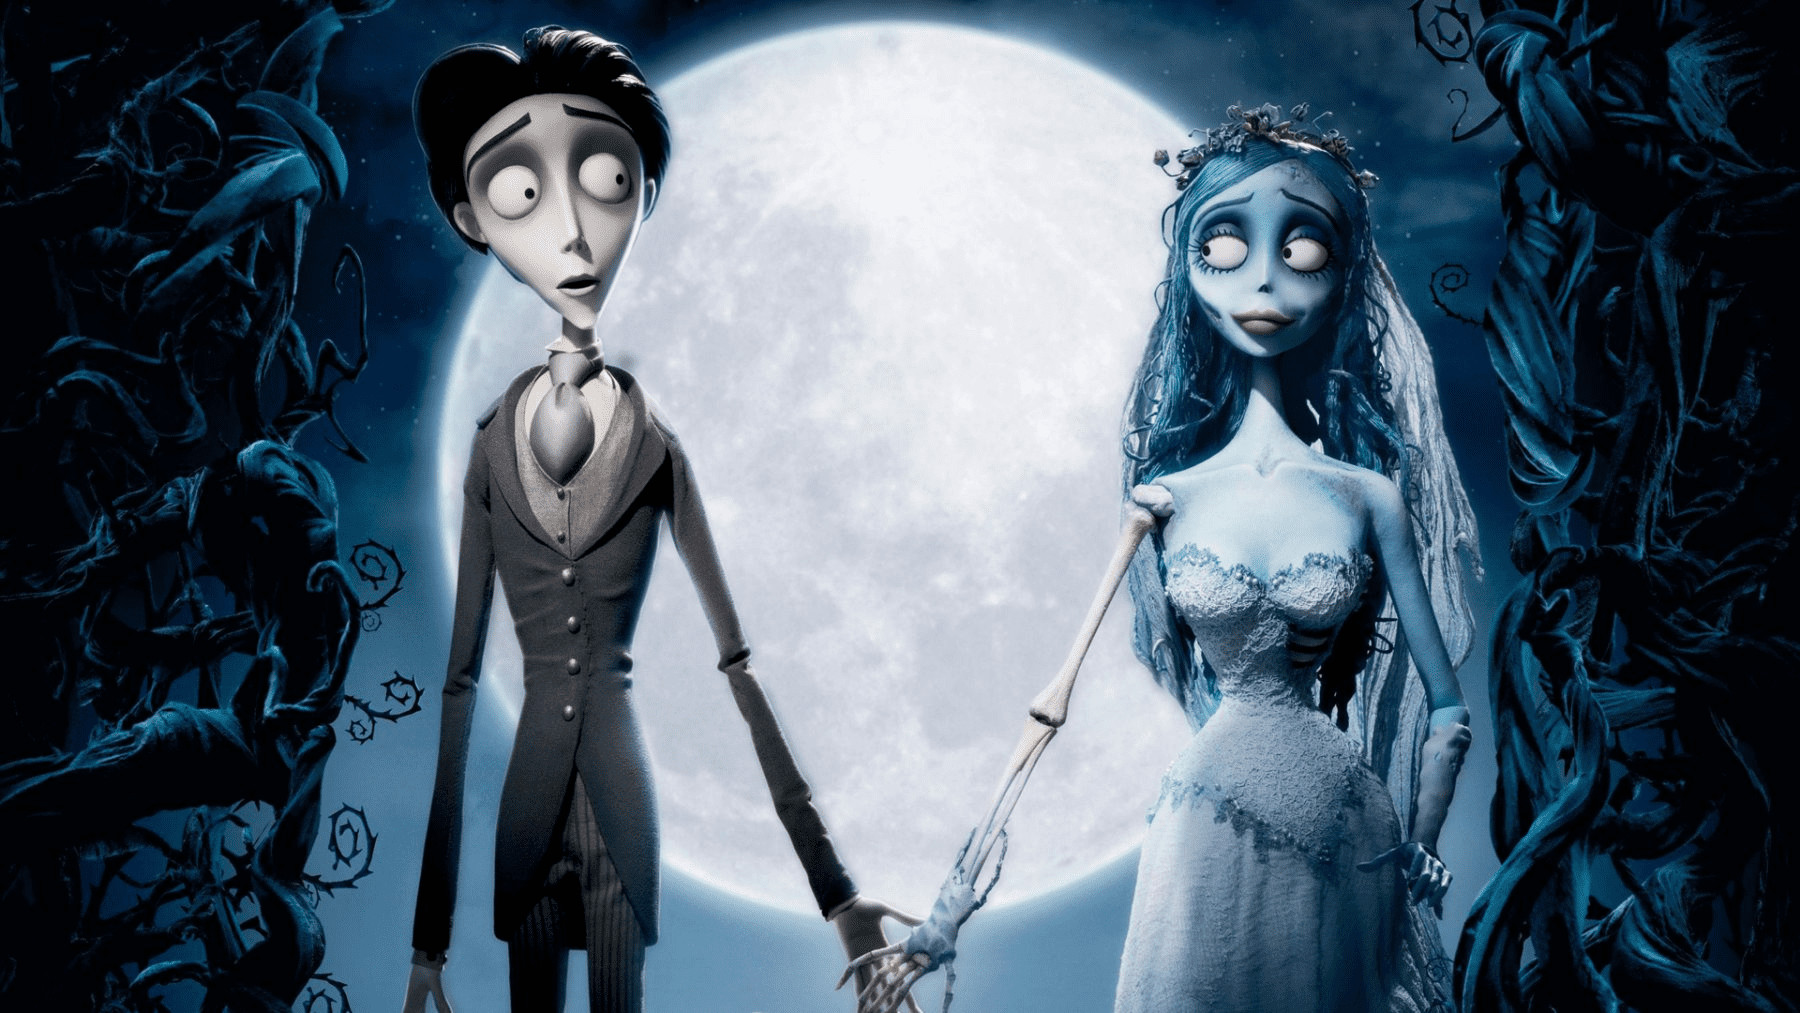 Johnny Depp and Helena Bonham Carter have given voices to the leading characters of Tim Burton's 'Corpse Bride.'